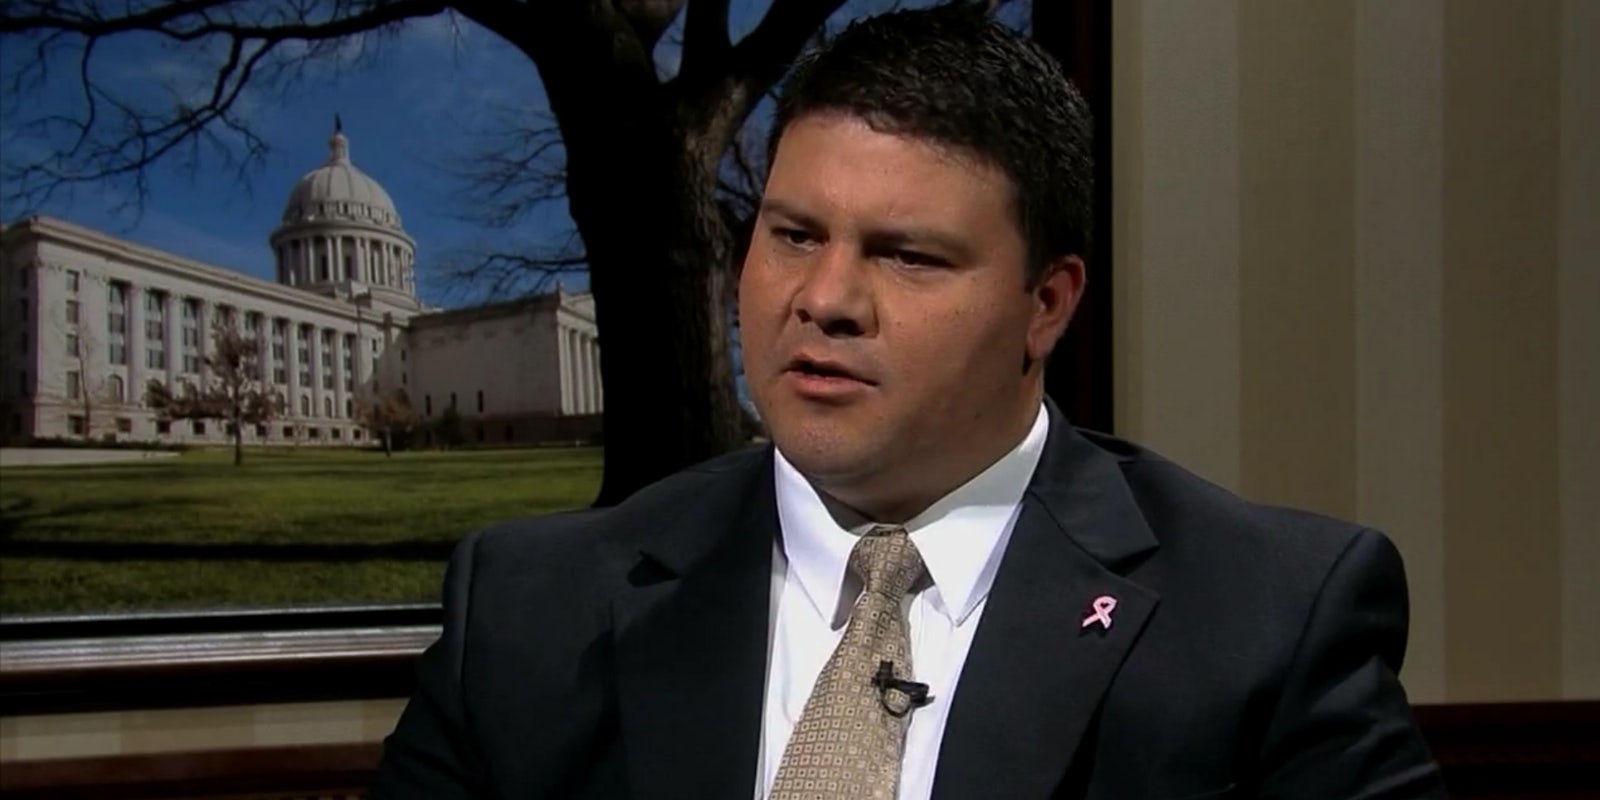 Ralph Shortey joins over 60 other state legislators who have faced sexual misconduct allegations.